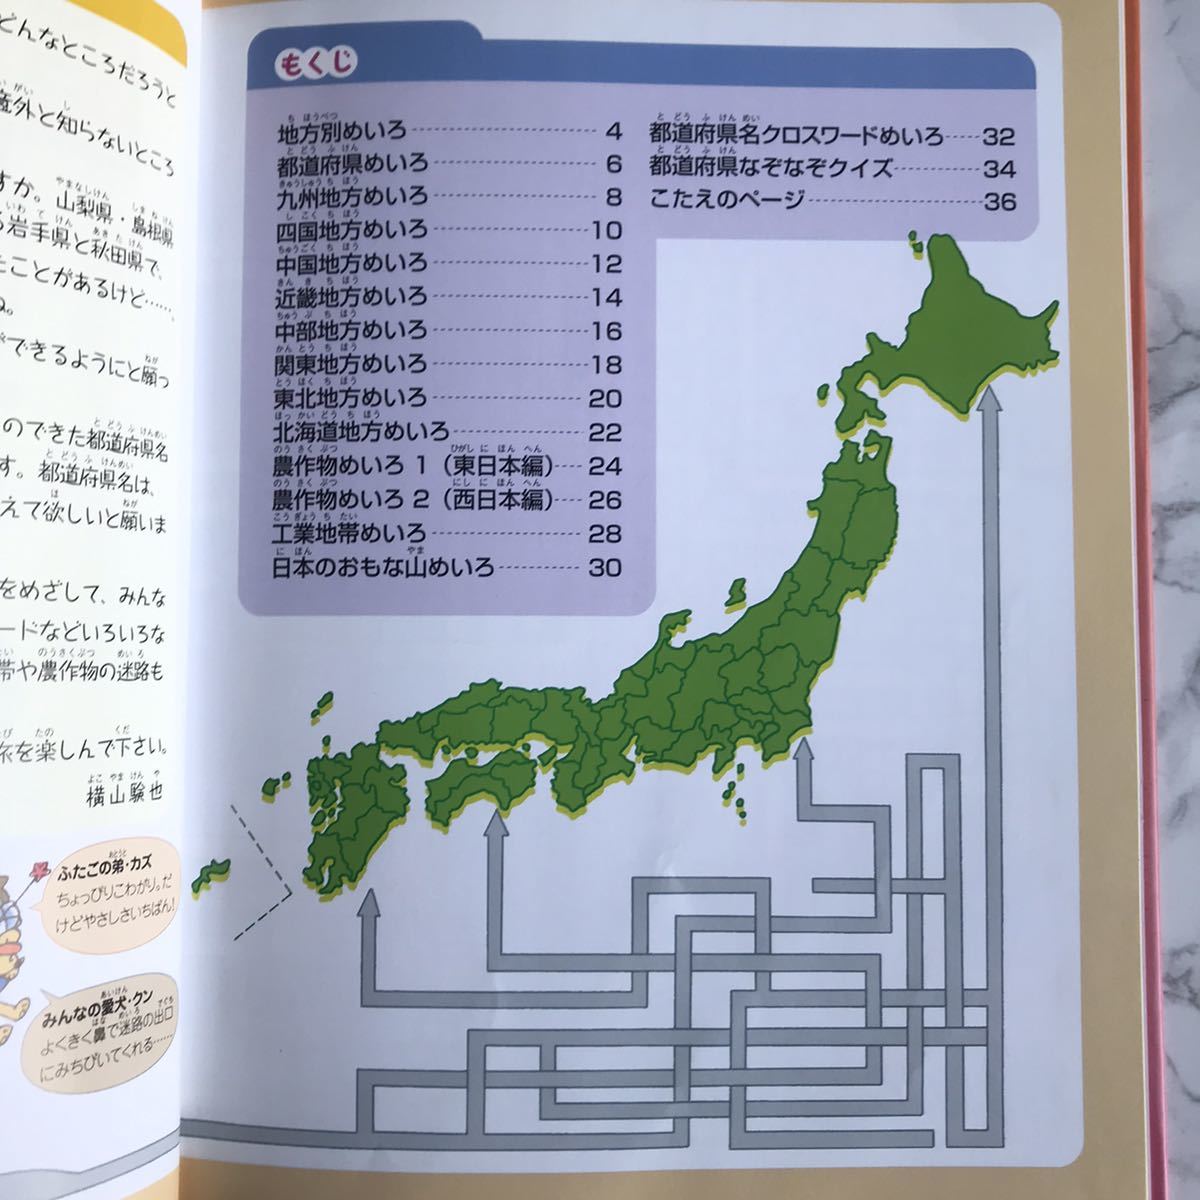 Paypayフリマ 日本地図 めいろ 2冊セット 知育 迷路 えほん 送料無料 教育 地理 絵本 児童書 地図 幼稚園 保育園 読書 勉強 学校 入門 ランキング